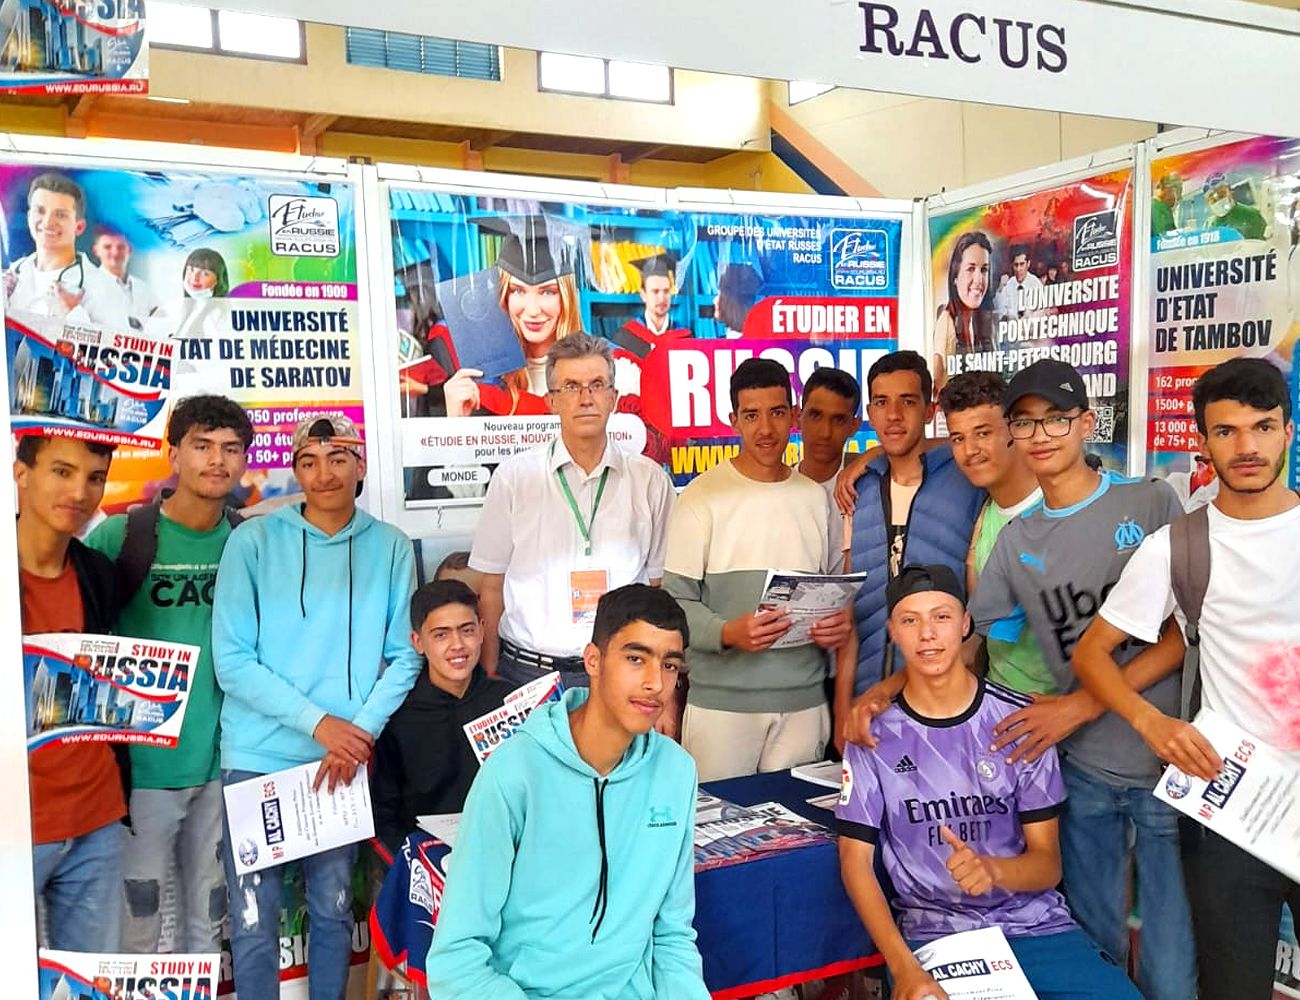 From dawn till dusk, the bright and colorful RACUS stand enjoyed great popularity among the visitors. Young Moroccans and their parents sought advice from representatives of Russian universities regarding many questions, including: What is the admission procedure? What documents are needed and within what time frame? What prospects are open to them after receiving a higher education degree from one of the TOP 20 universities in Russia? Economic and engineering programs were particularly in demand.